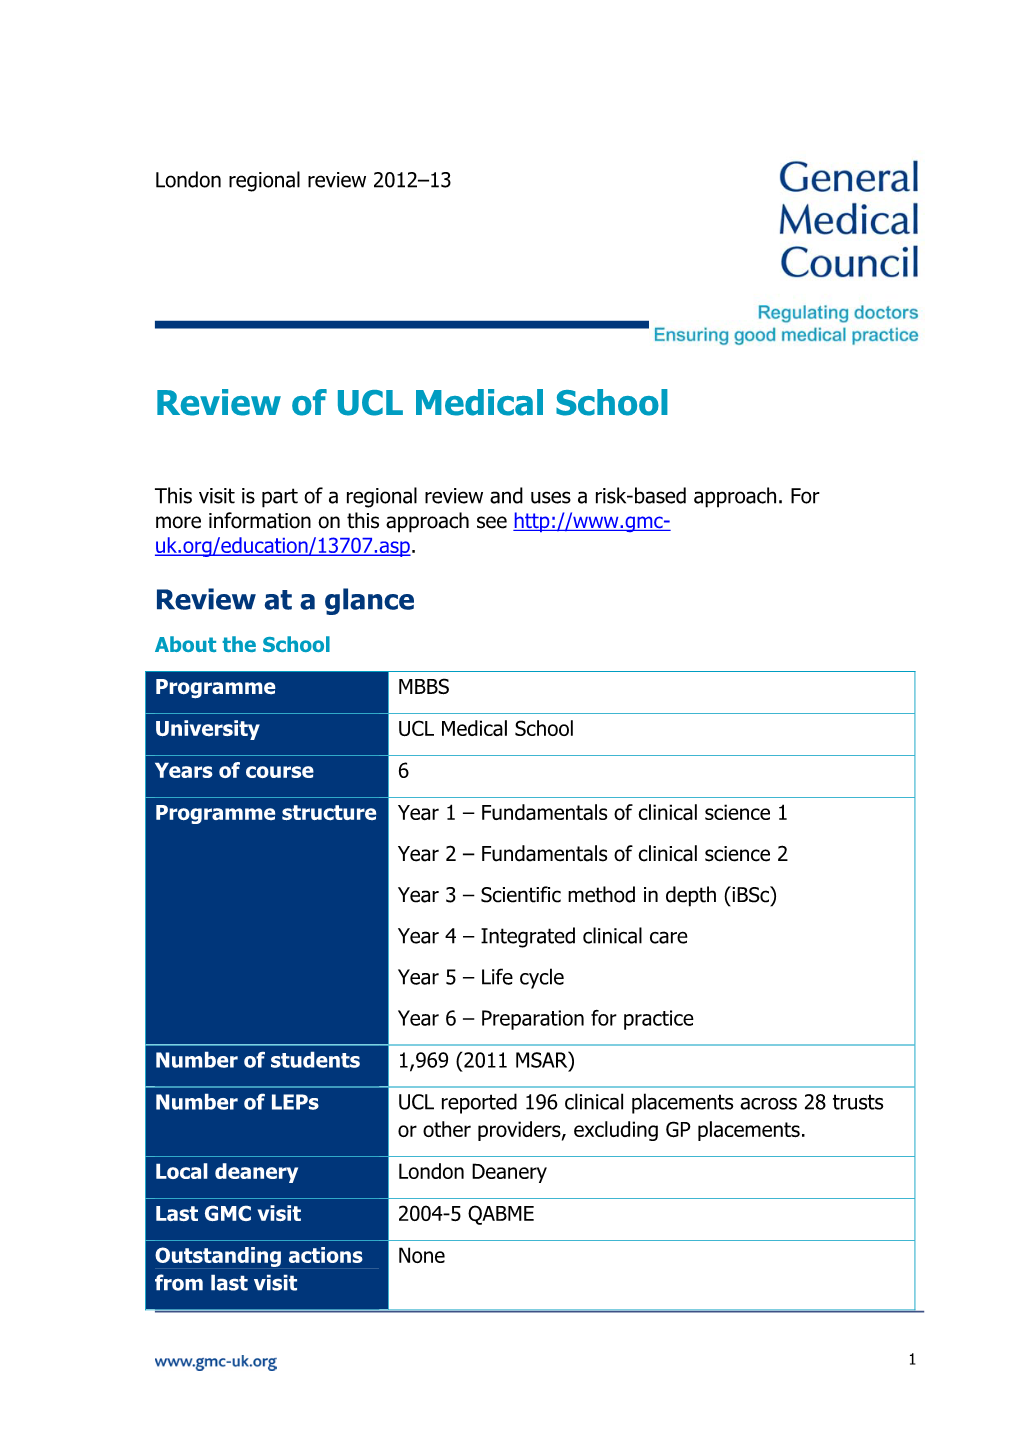 Review of UCL Medical School